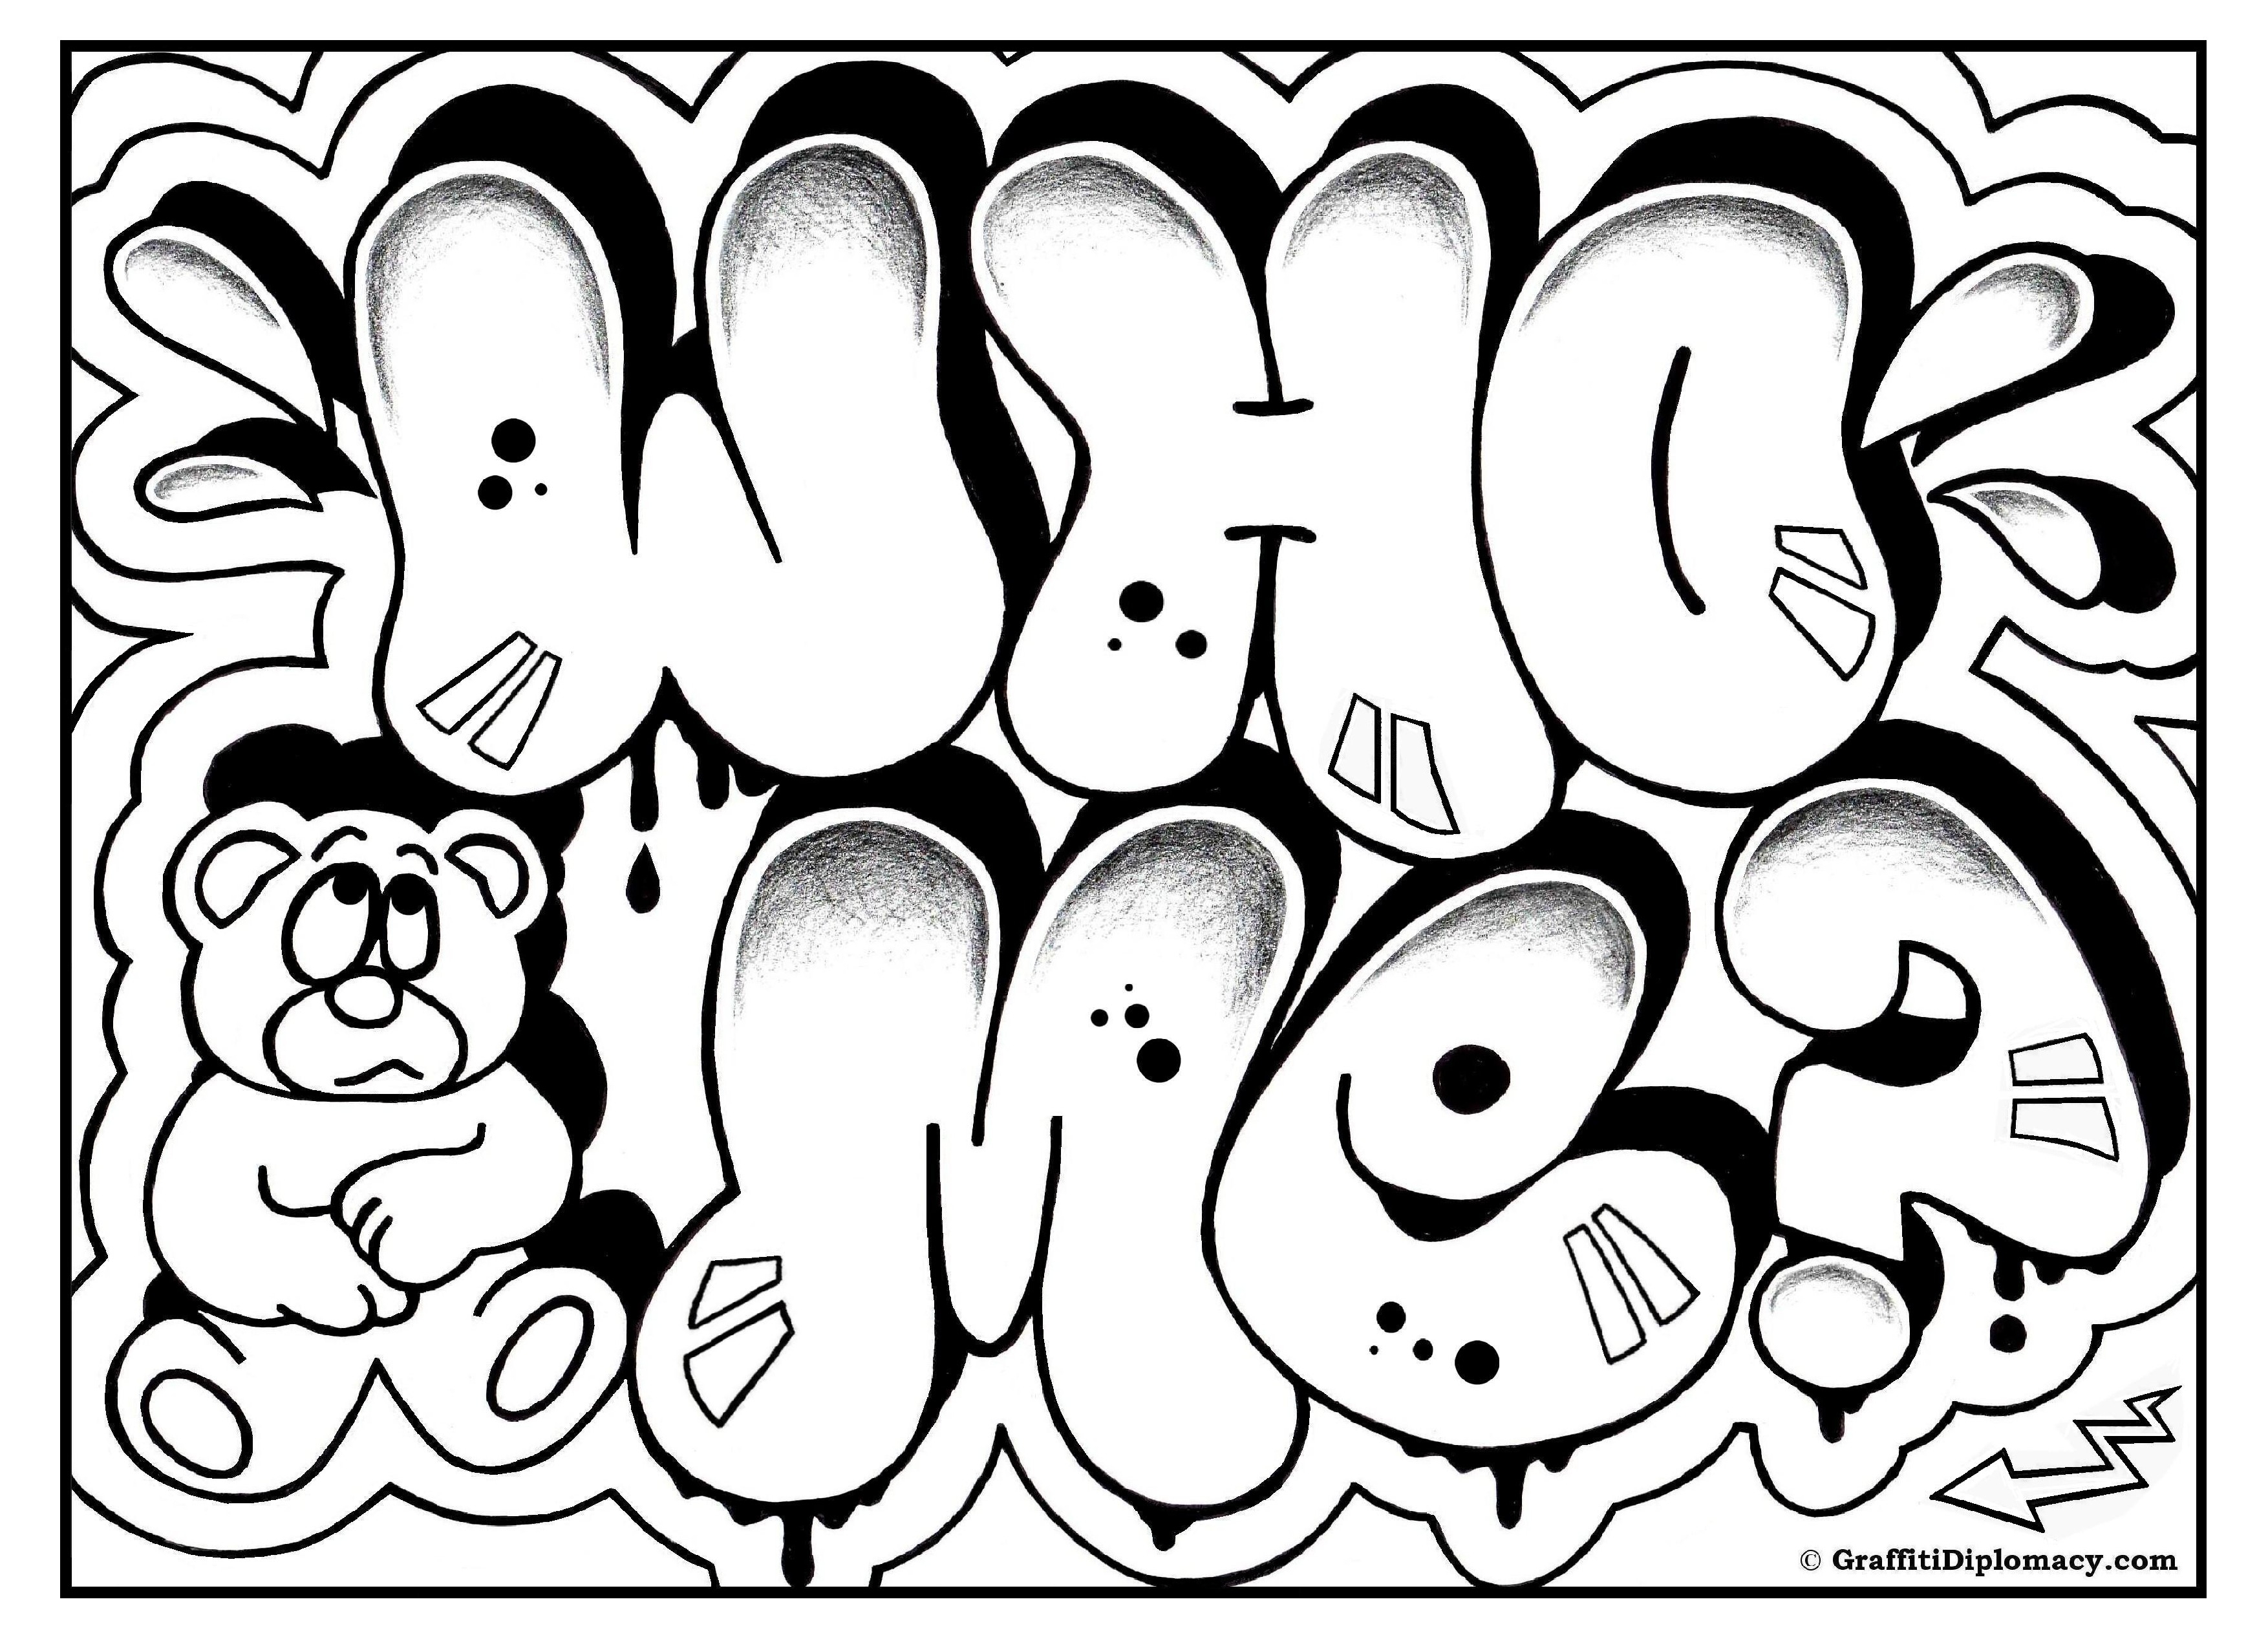 Graffiti Words Coloring Pages at GetColorings.com | Free ...